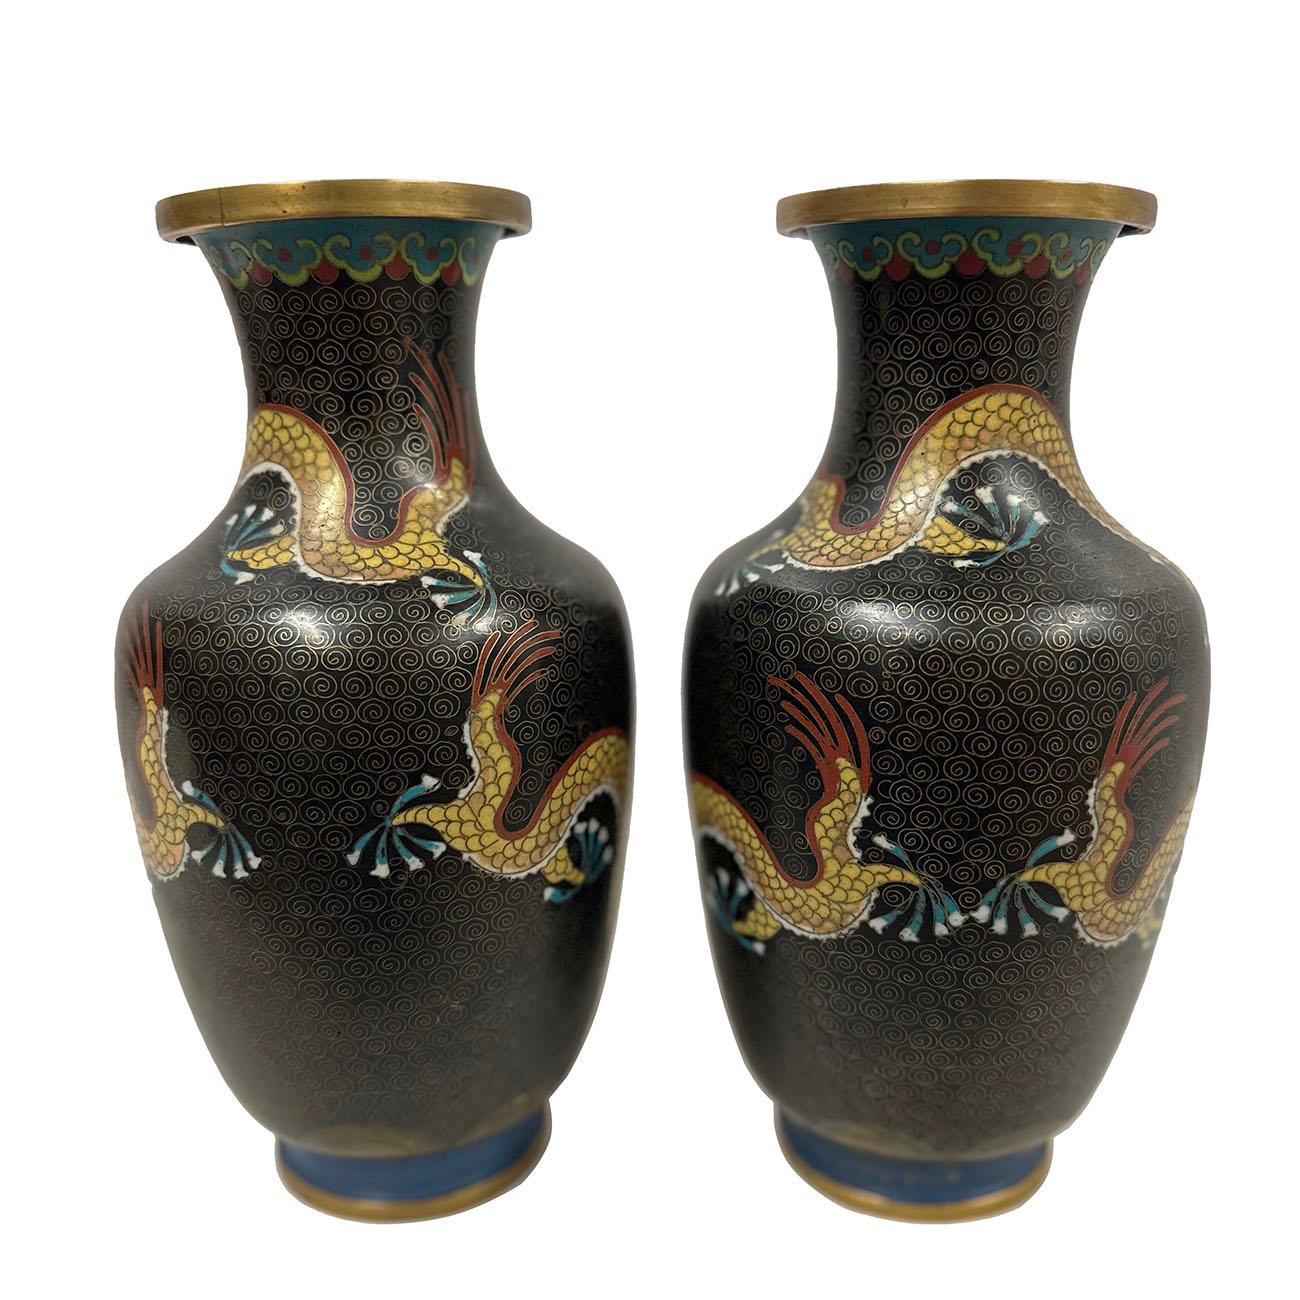 Chinese Export Early 20th Century Pair of Chinese Cloisonne Enamel Dragon Vases